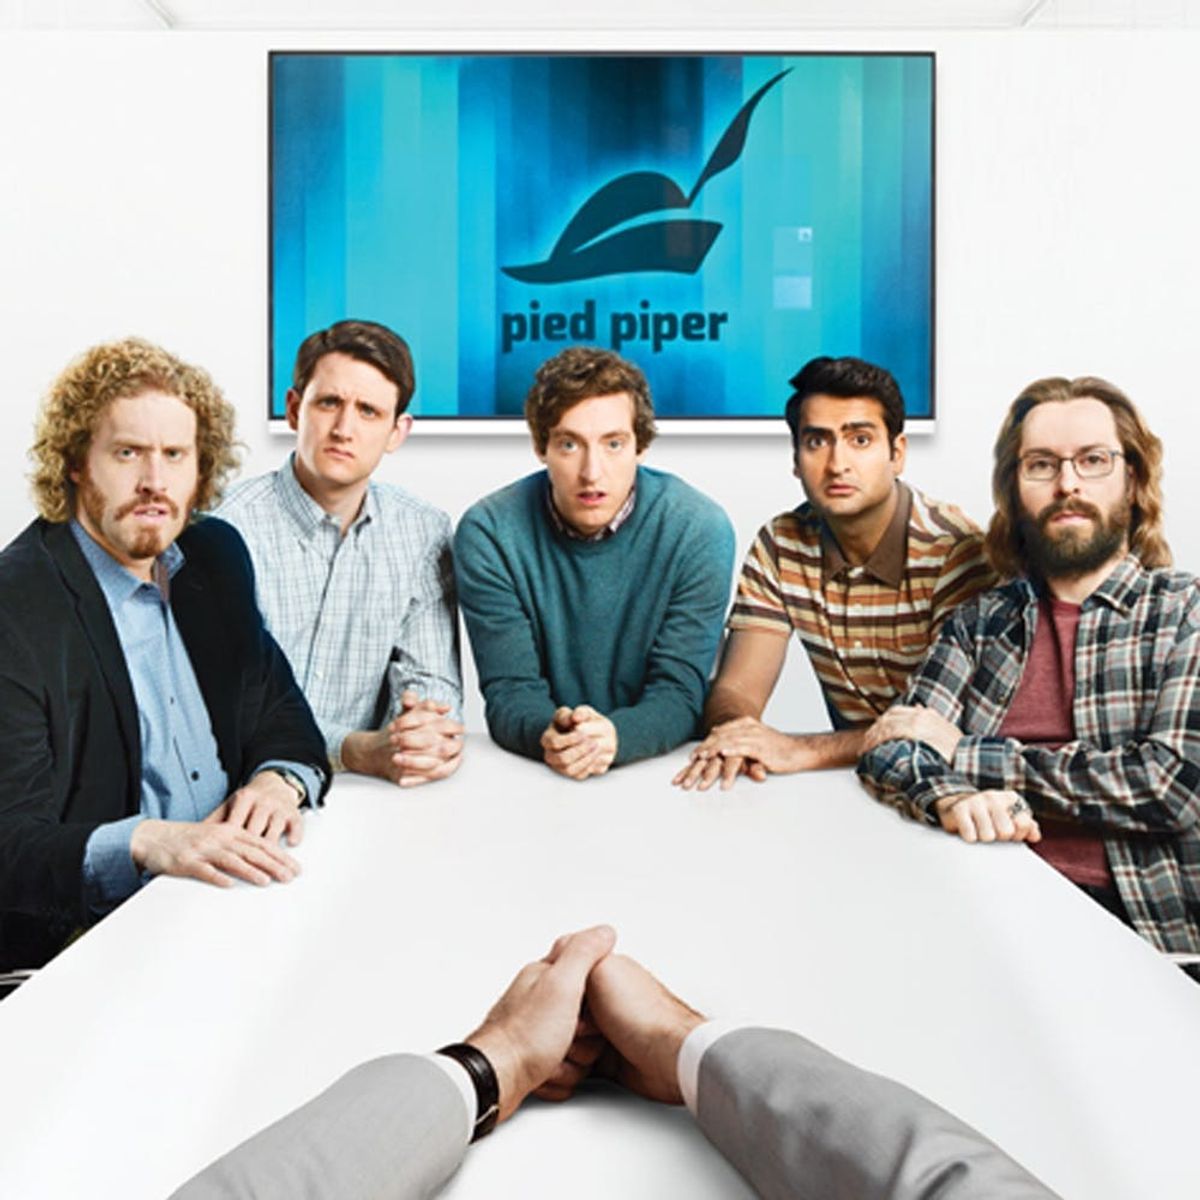 If You Geeked Out Over Silicon Valley, Stream These 5 Shows Next